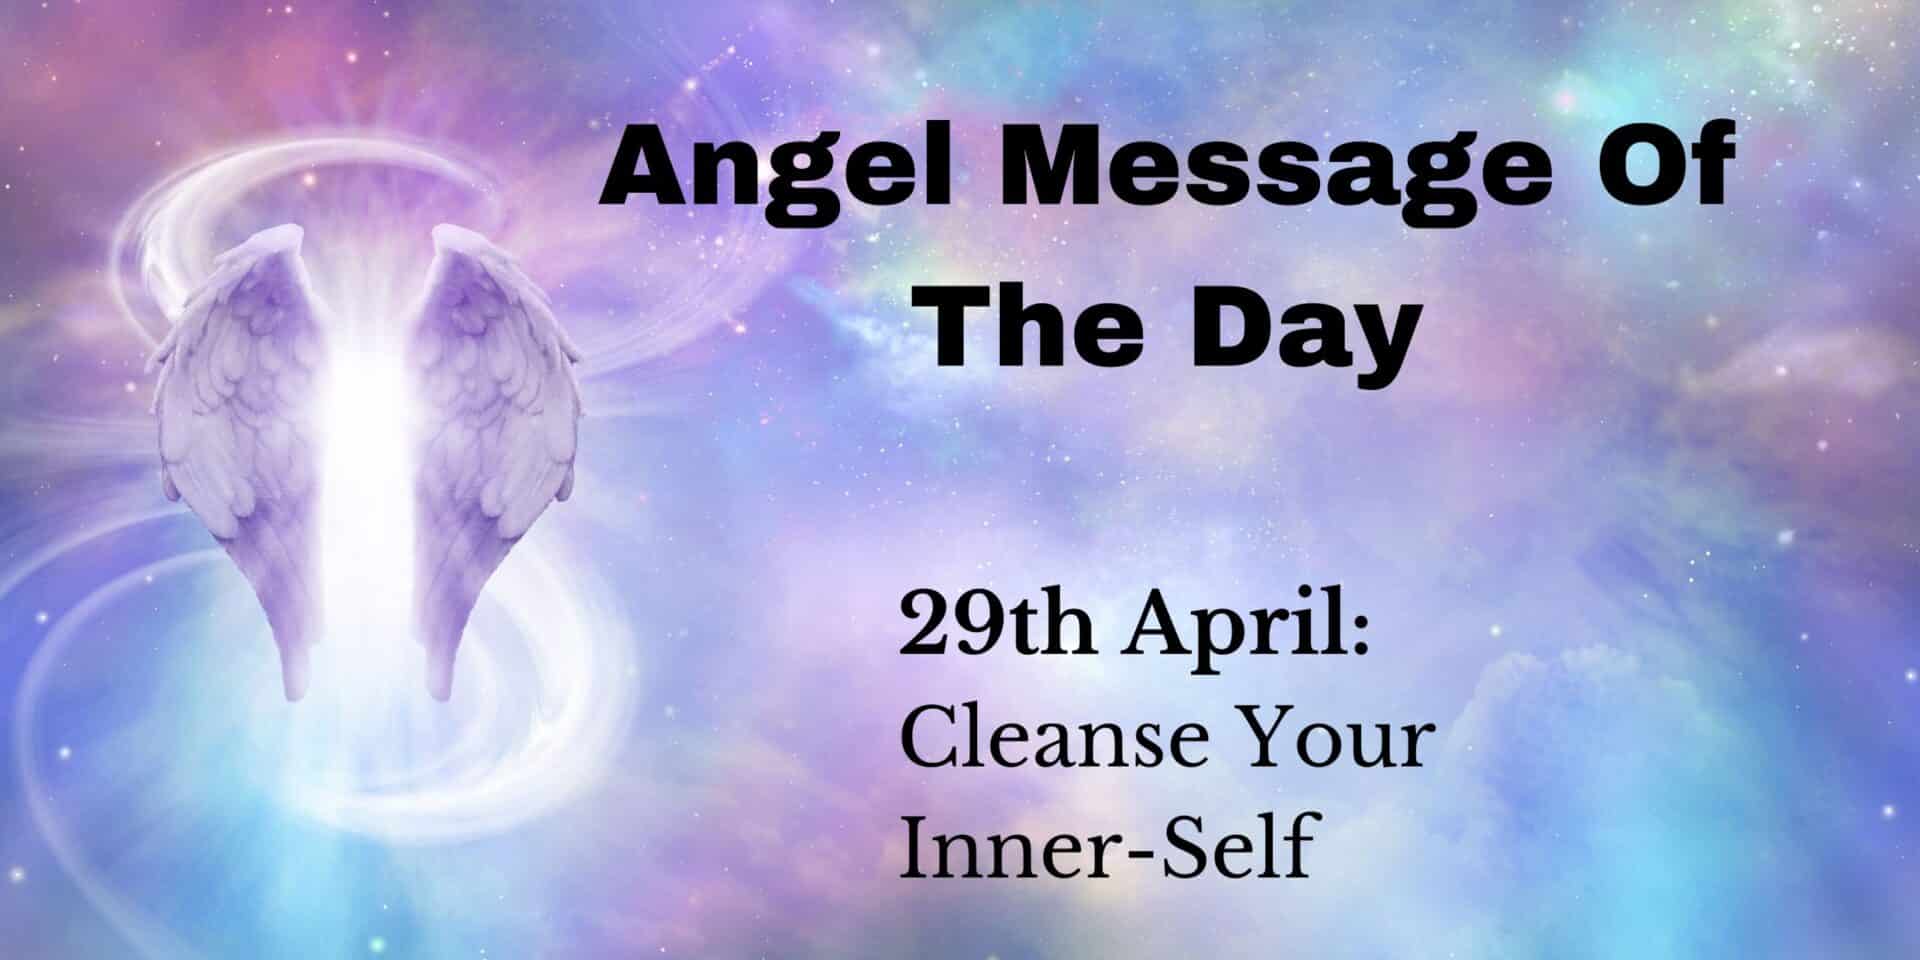 angel message of the day : cleanse your inner-self